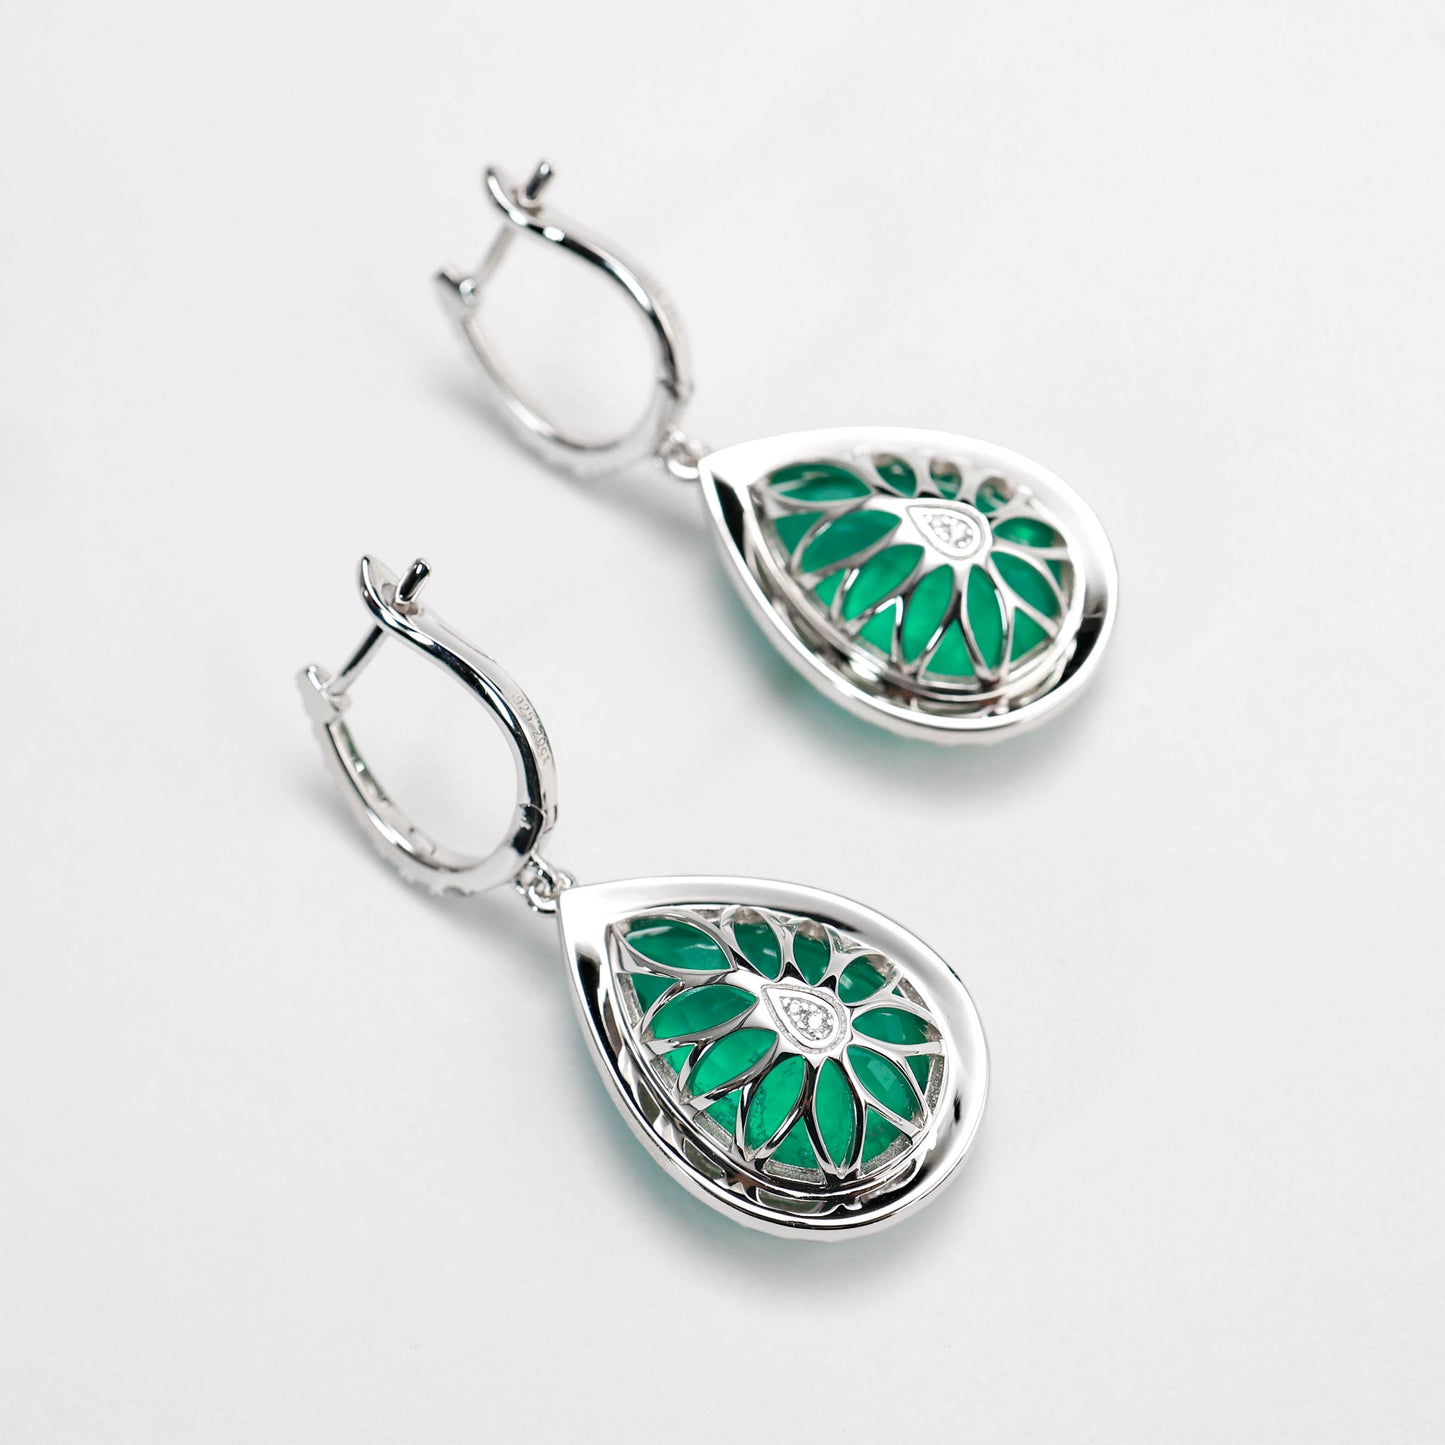 Micro-setting Emerald color Lab created stones Waterdrop shape earrings, sterling silver. (20 carat)